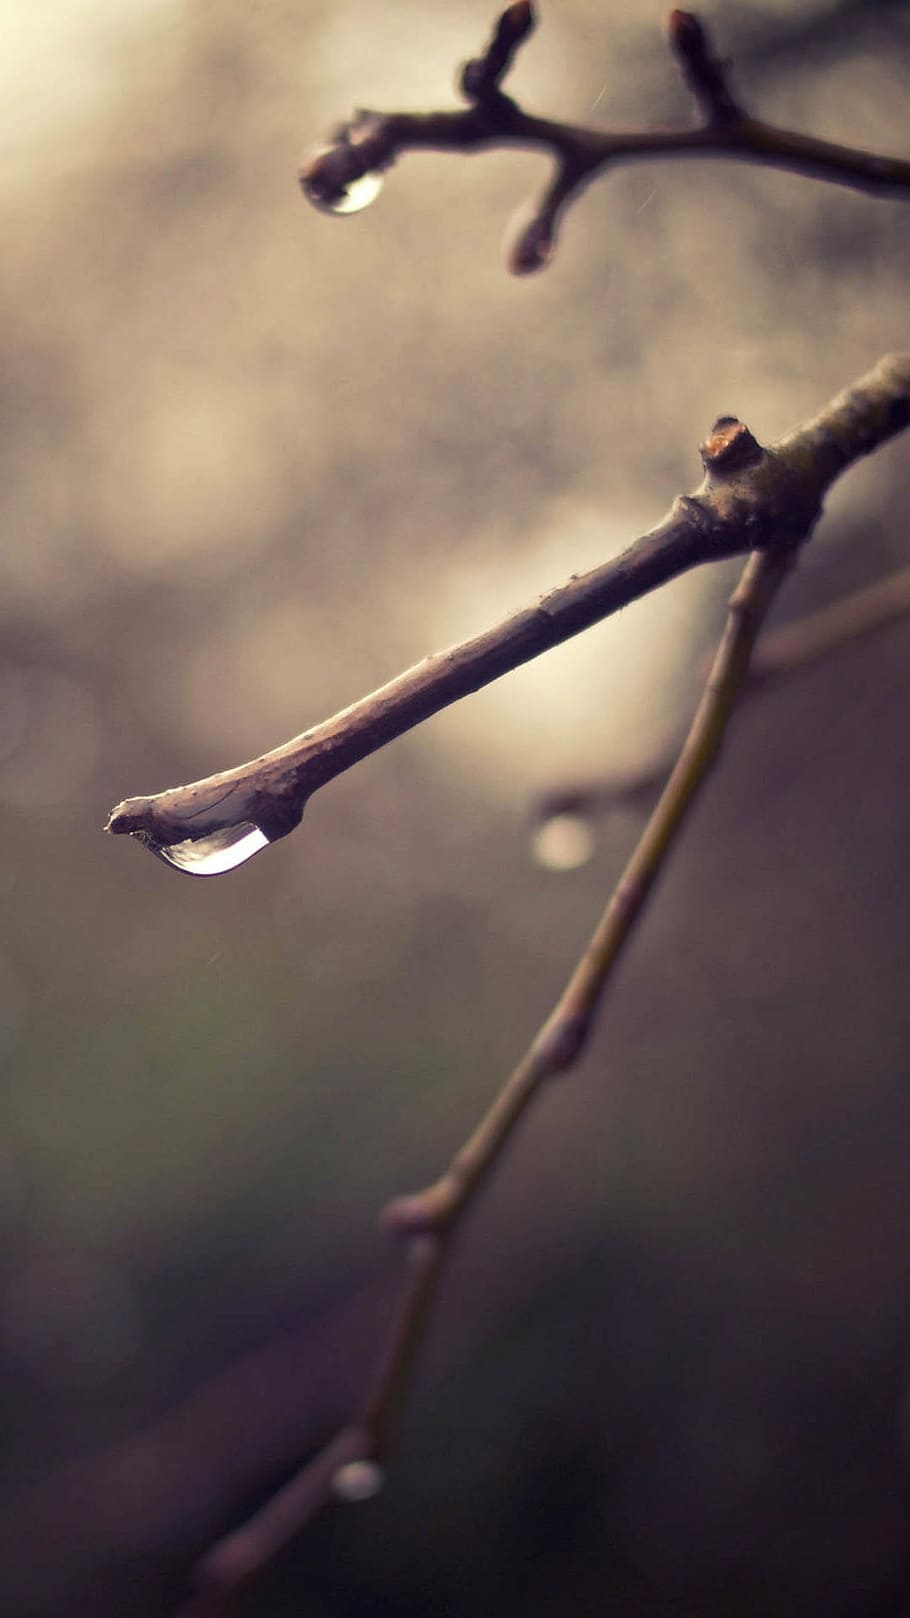 serenity, quiet, simple and elegant, close-up, branch, twig, outdoors, nature, day, leaf